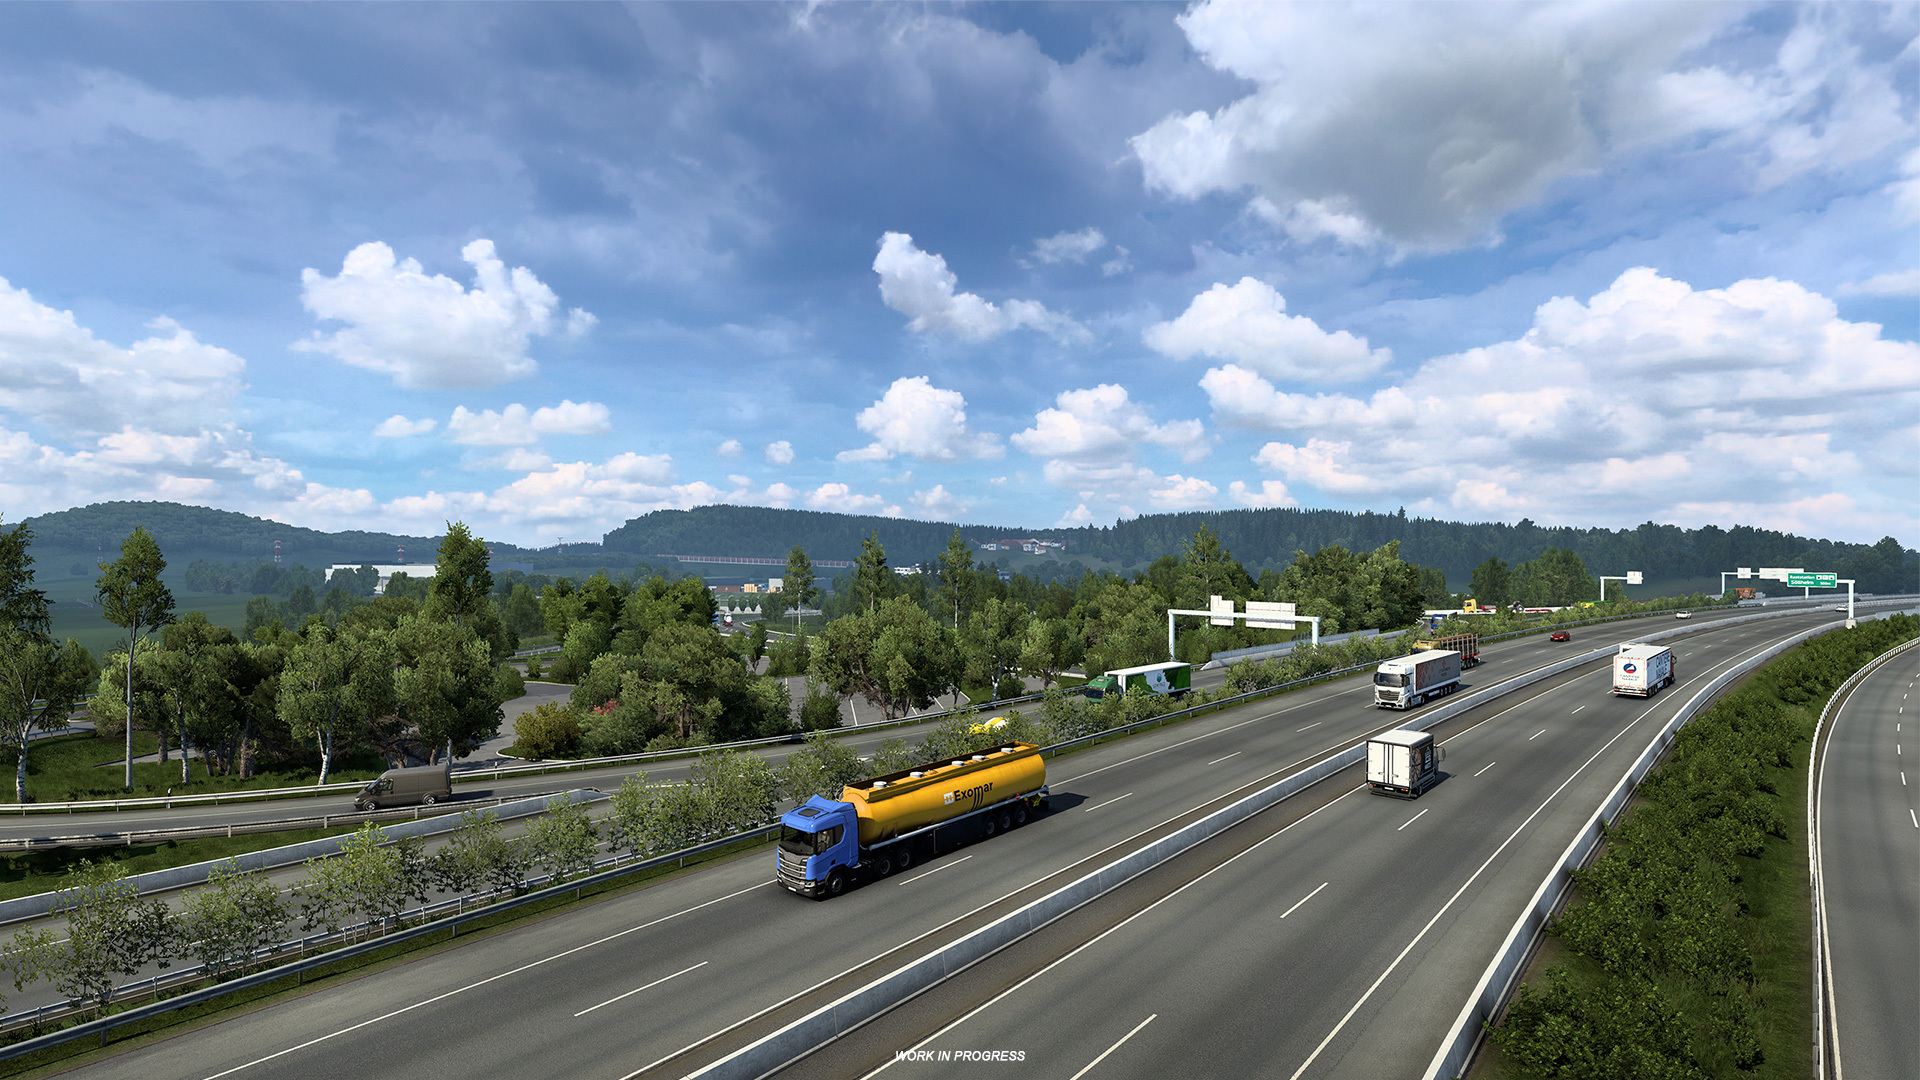 ETS2/ATS Coming To Steam Deck, A New Hand-Held Gaming PC